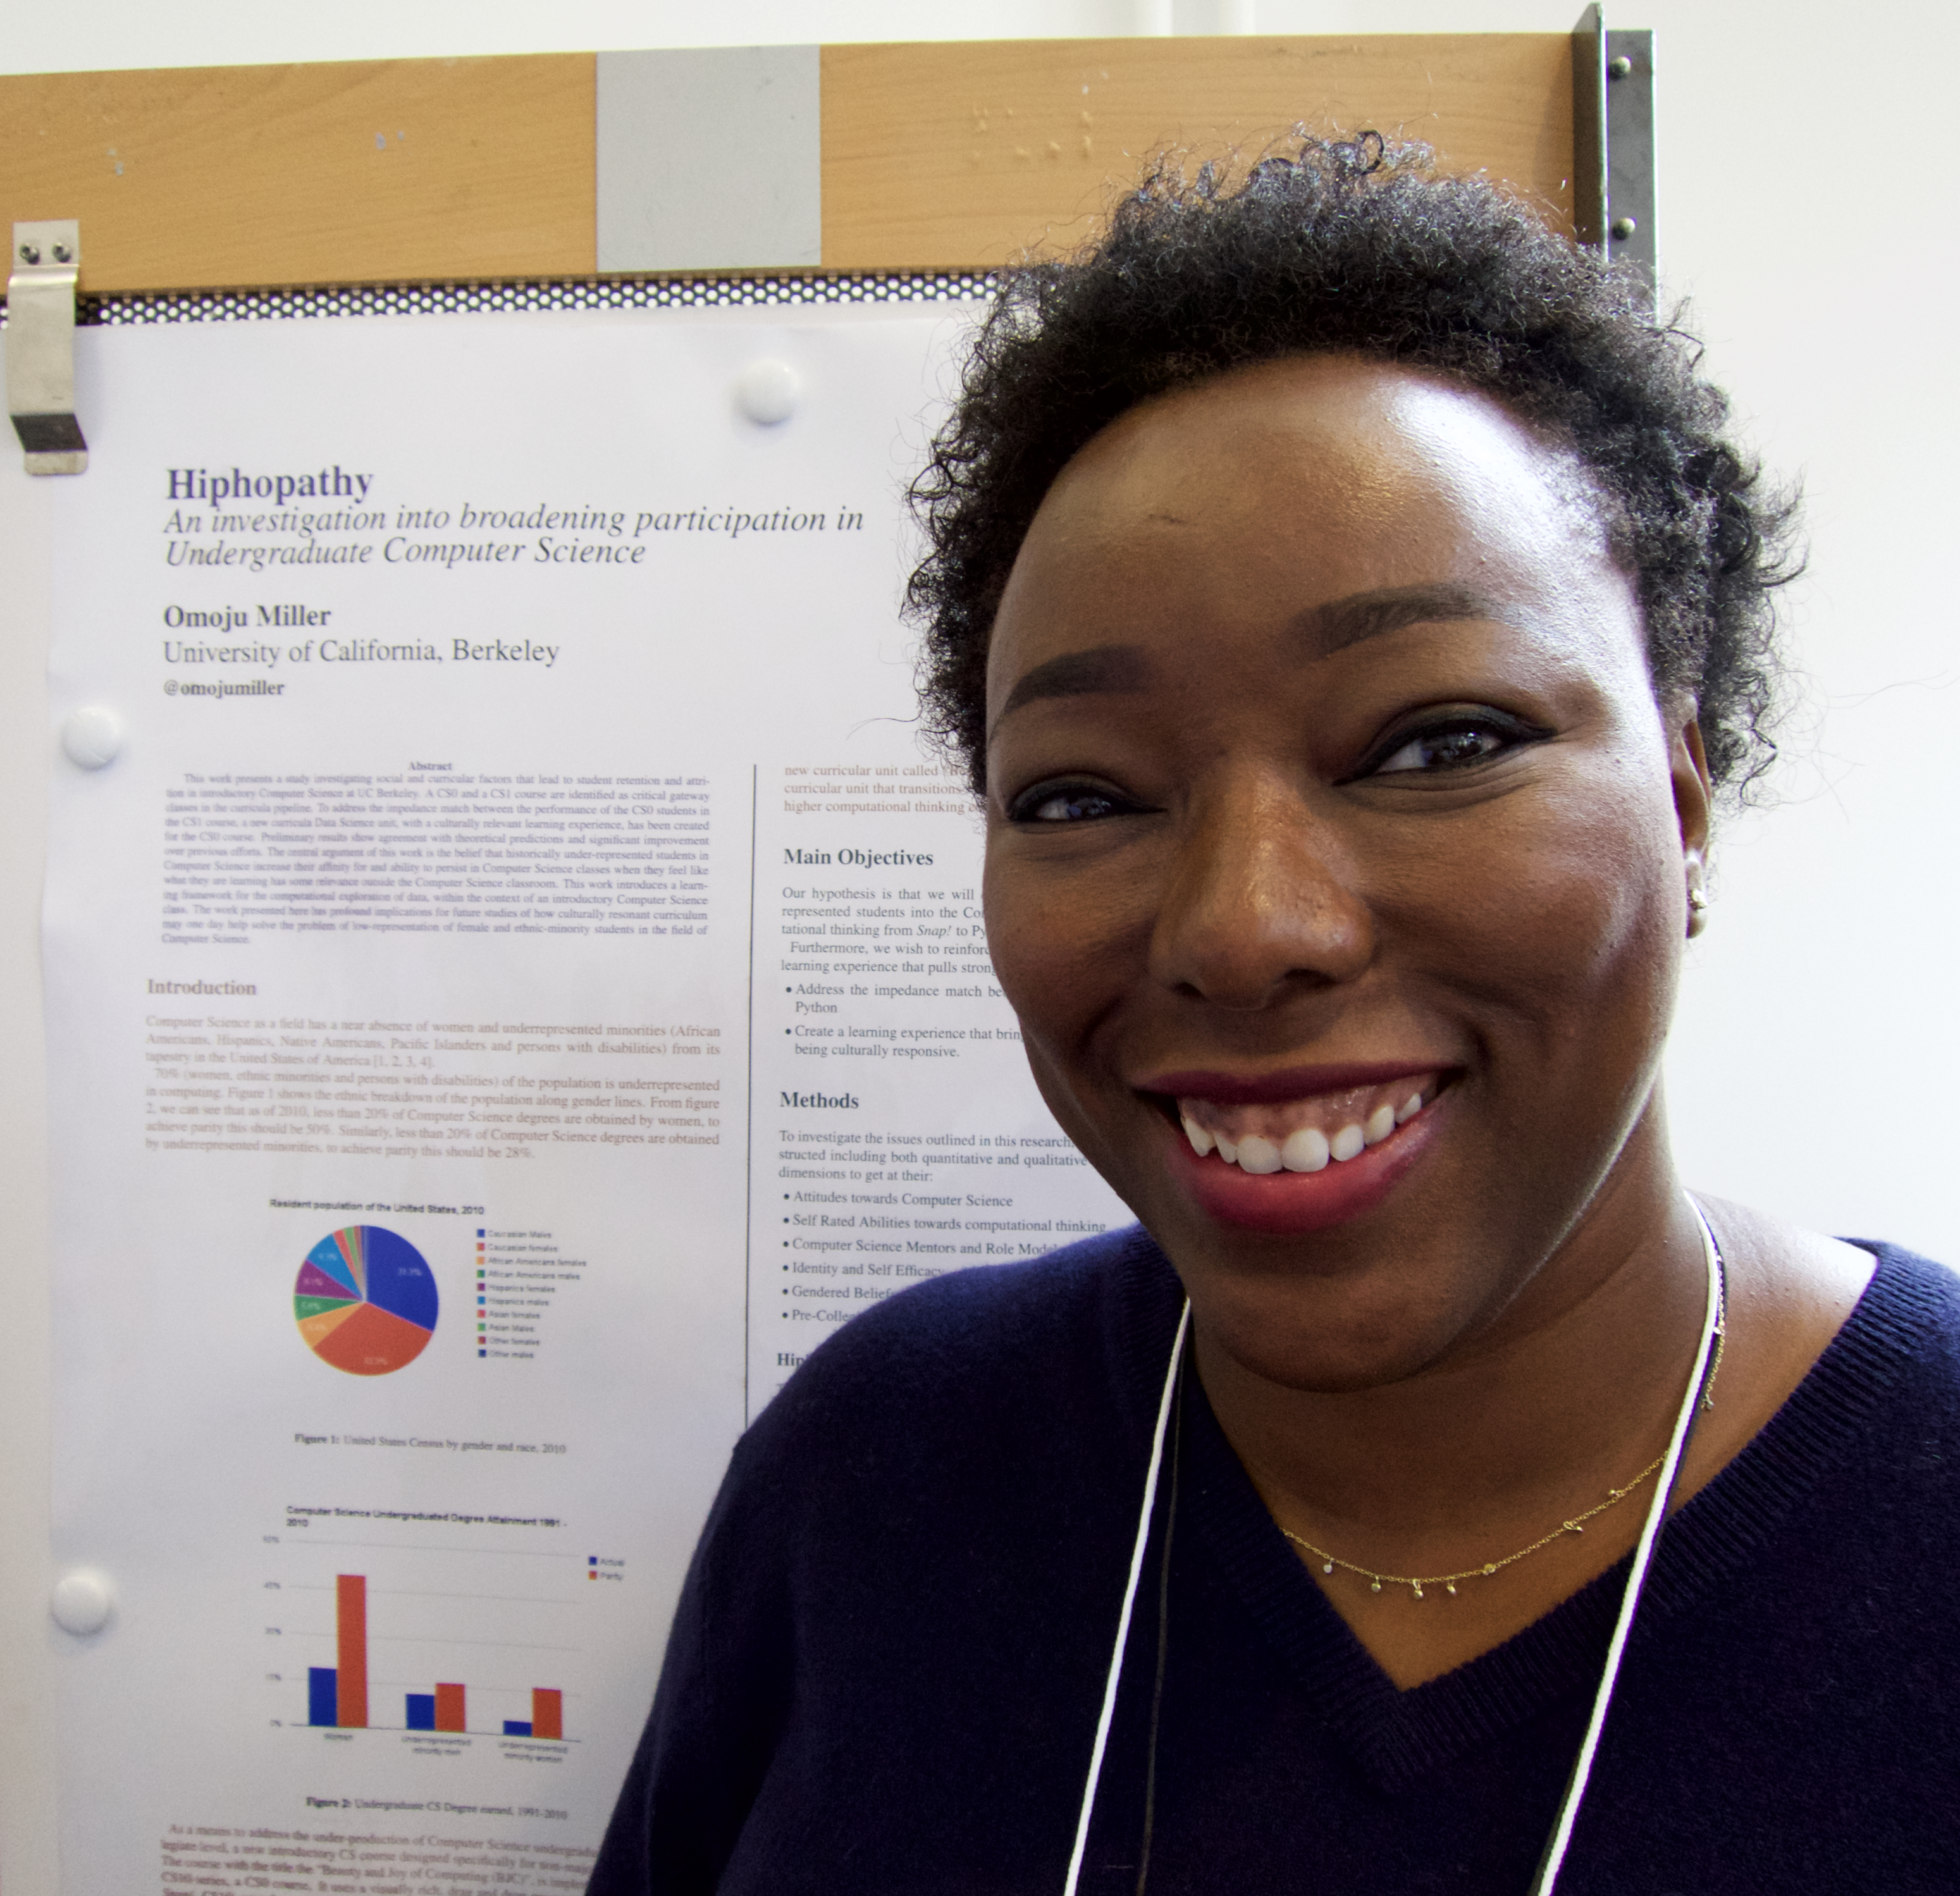 Sage Scholar Omoju Miller, from the University of California at Berkeley, is shown with her poster at the Paris Sage Assembly, April 16, 2015.